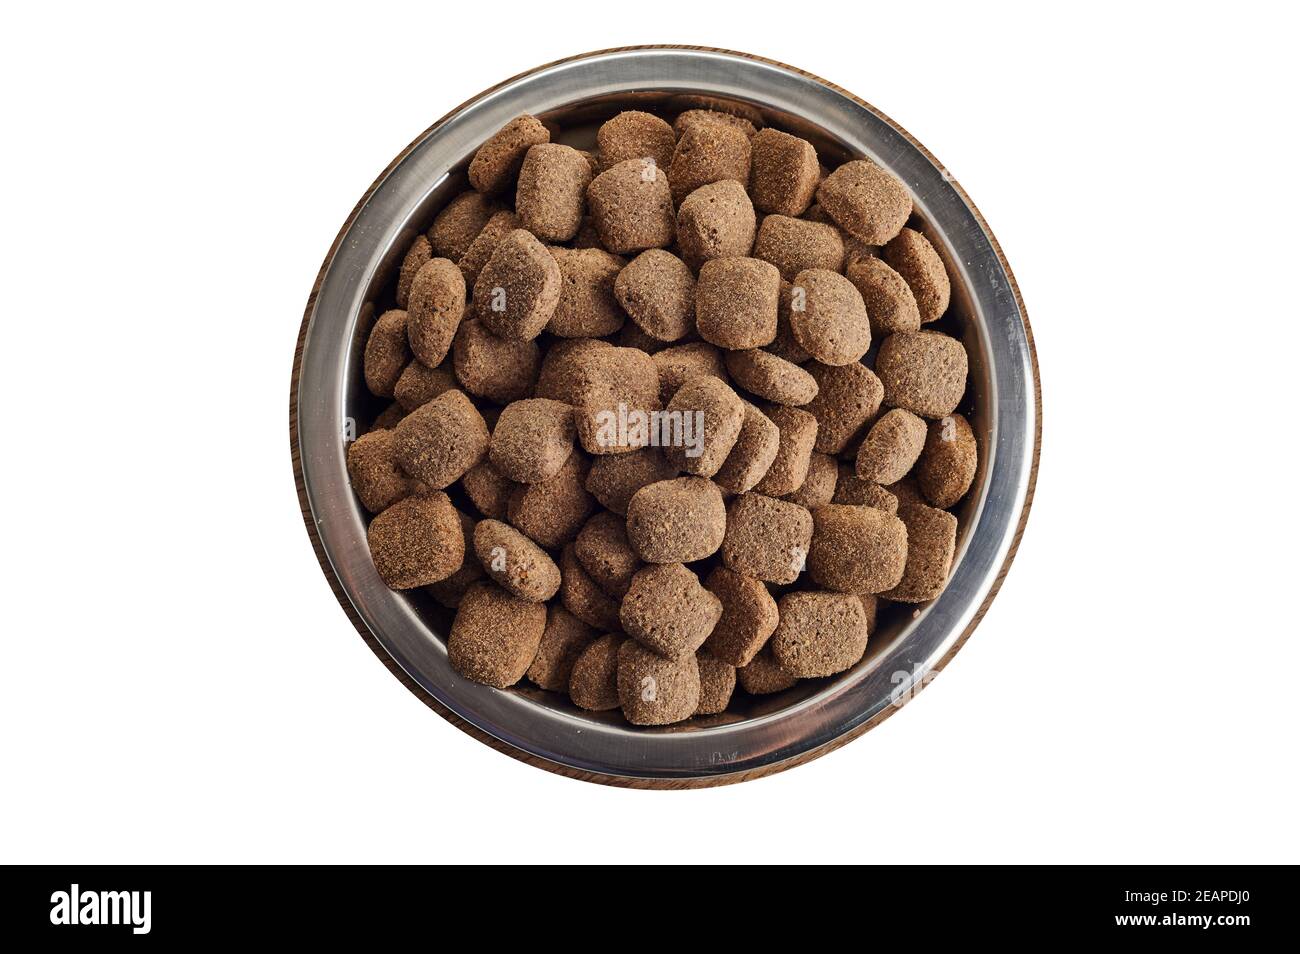 Bowl full of dried biscuits or pellets for animals to provide a balanced diet for your pet dog or cat in a top down view isolated on white Stock Photo